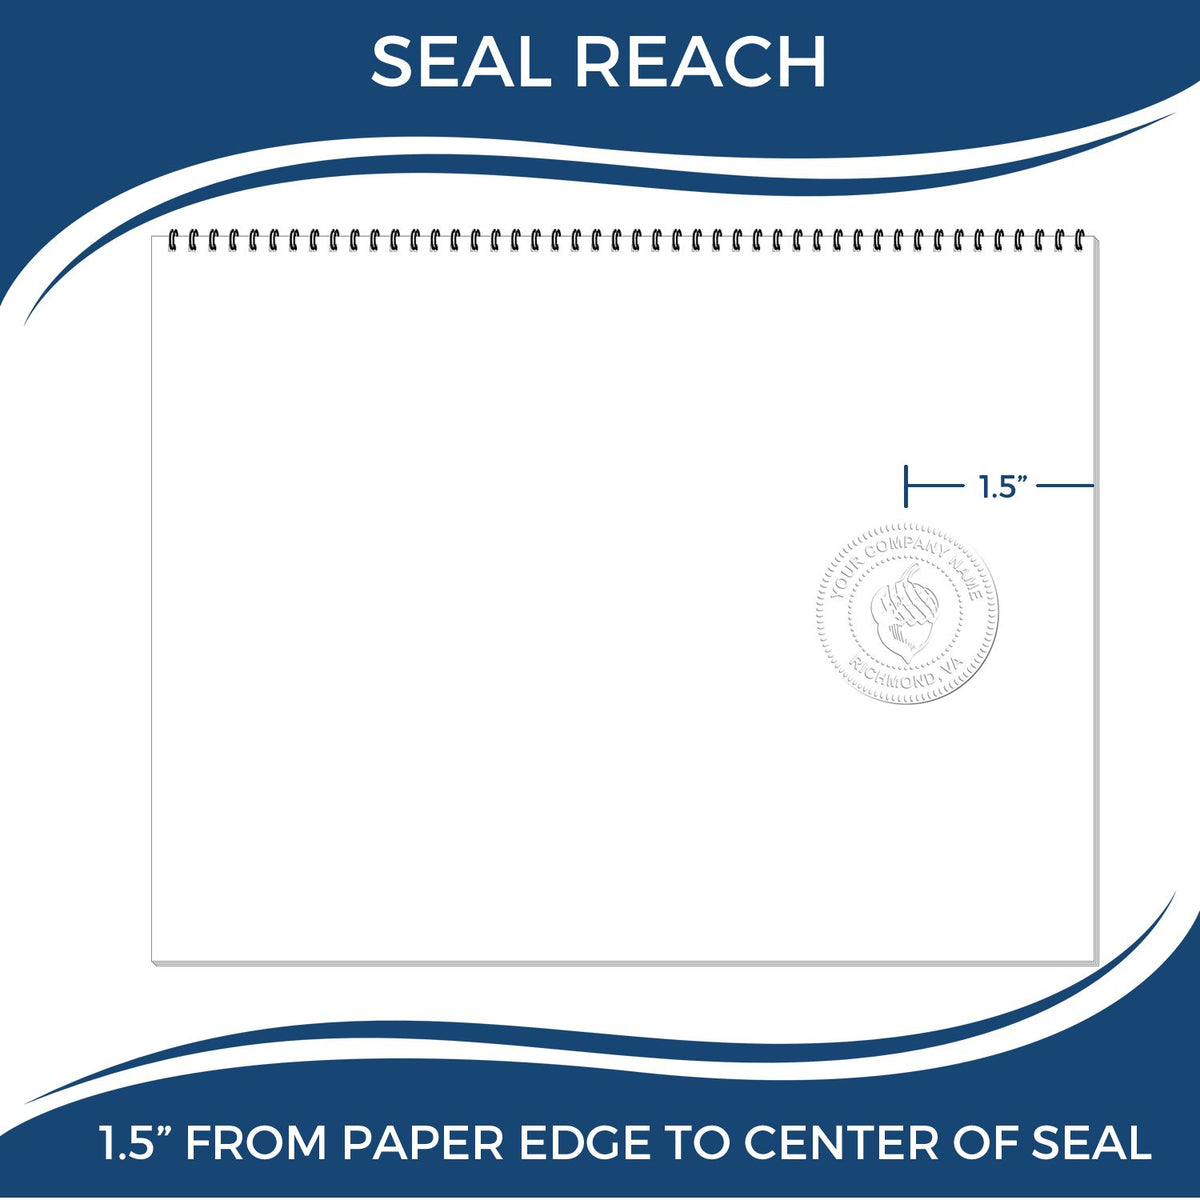 An infographic showing the seal reach which is represented by a ruler and a miniature seal image of the Gift Illinois Engineer Seal